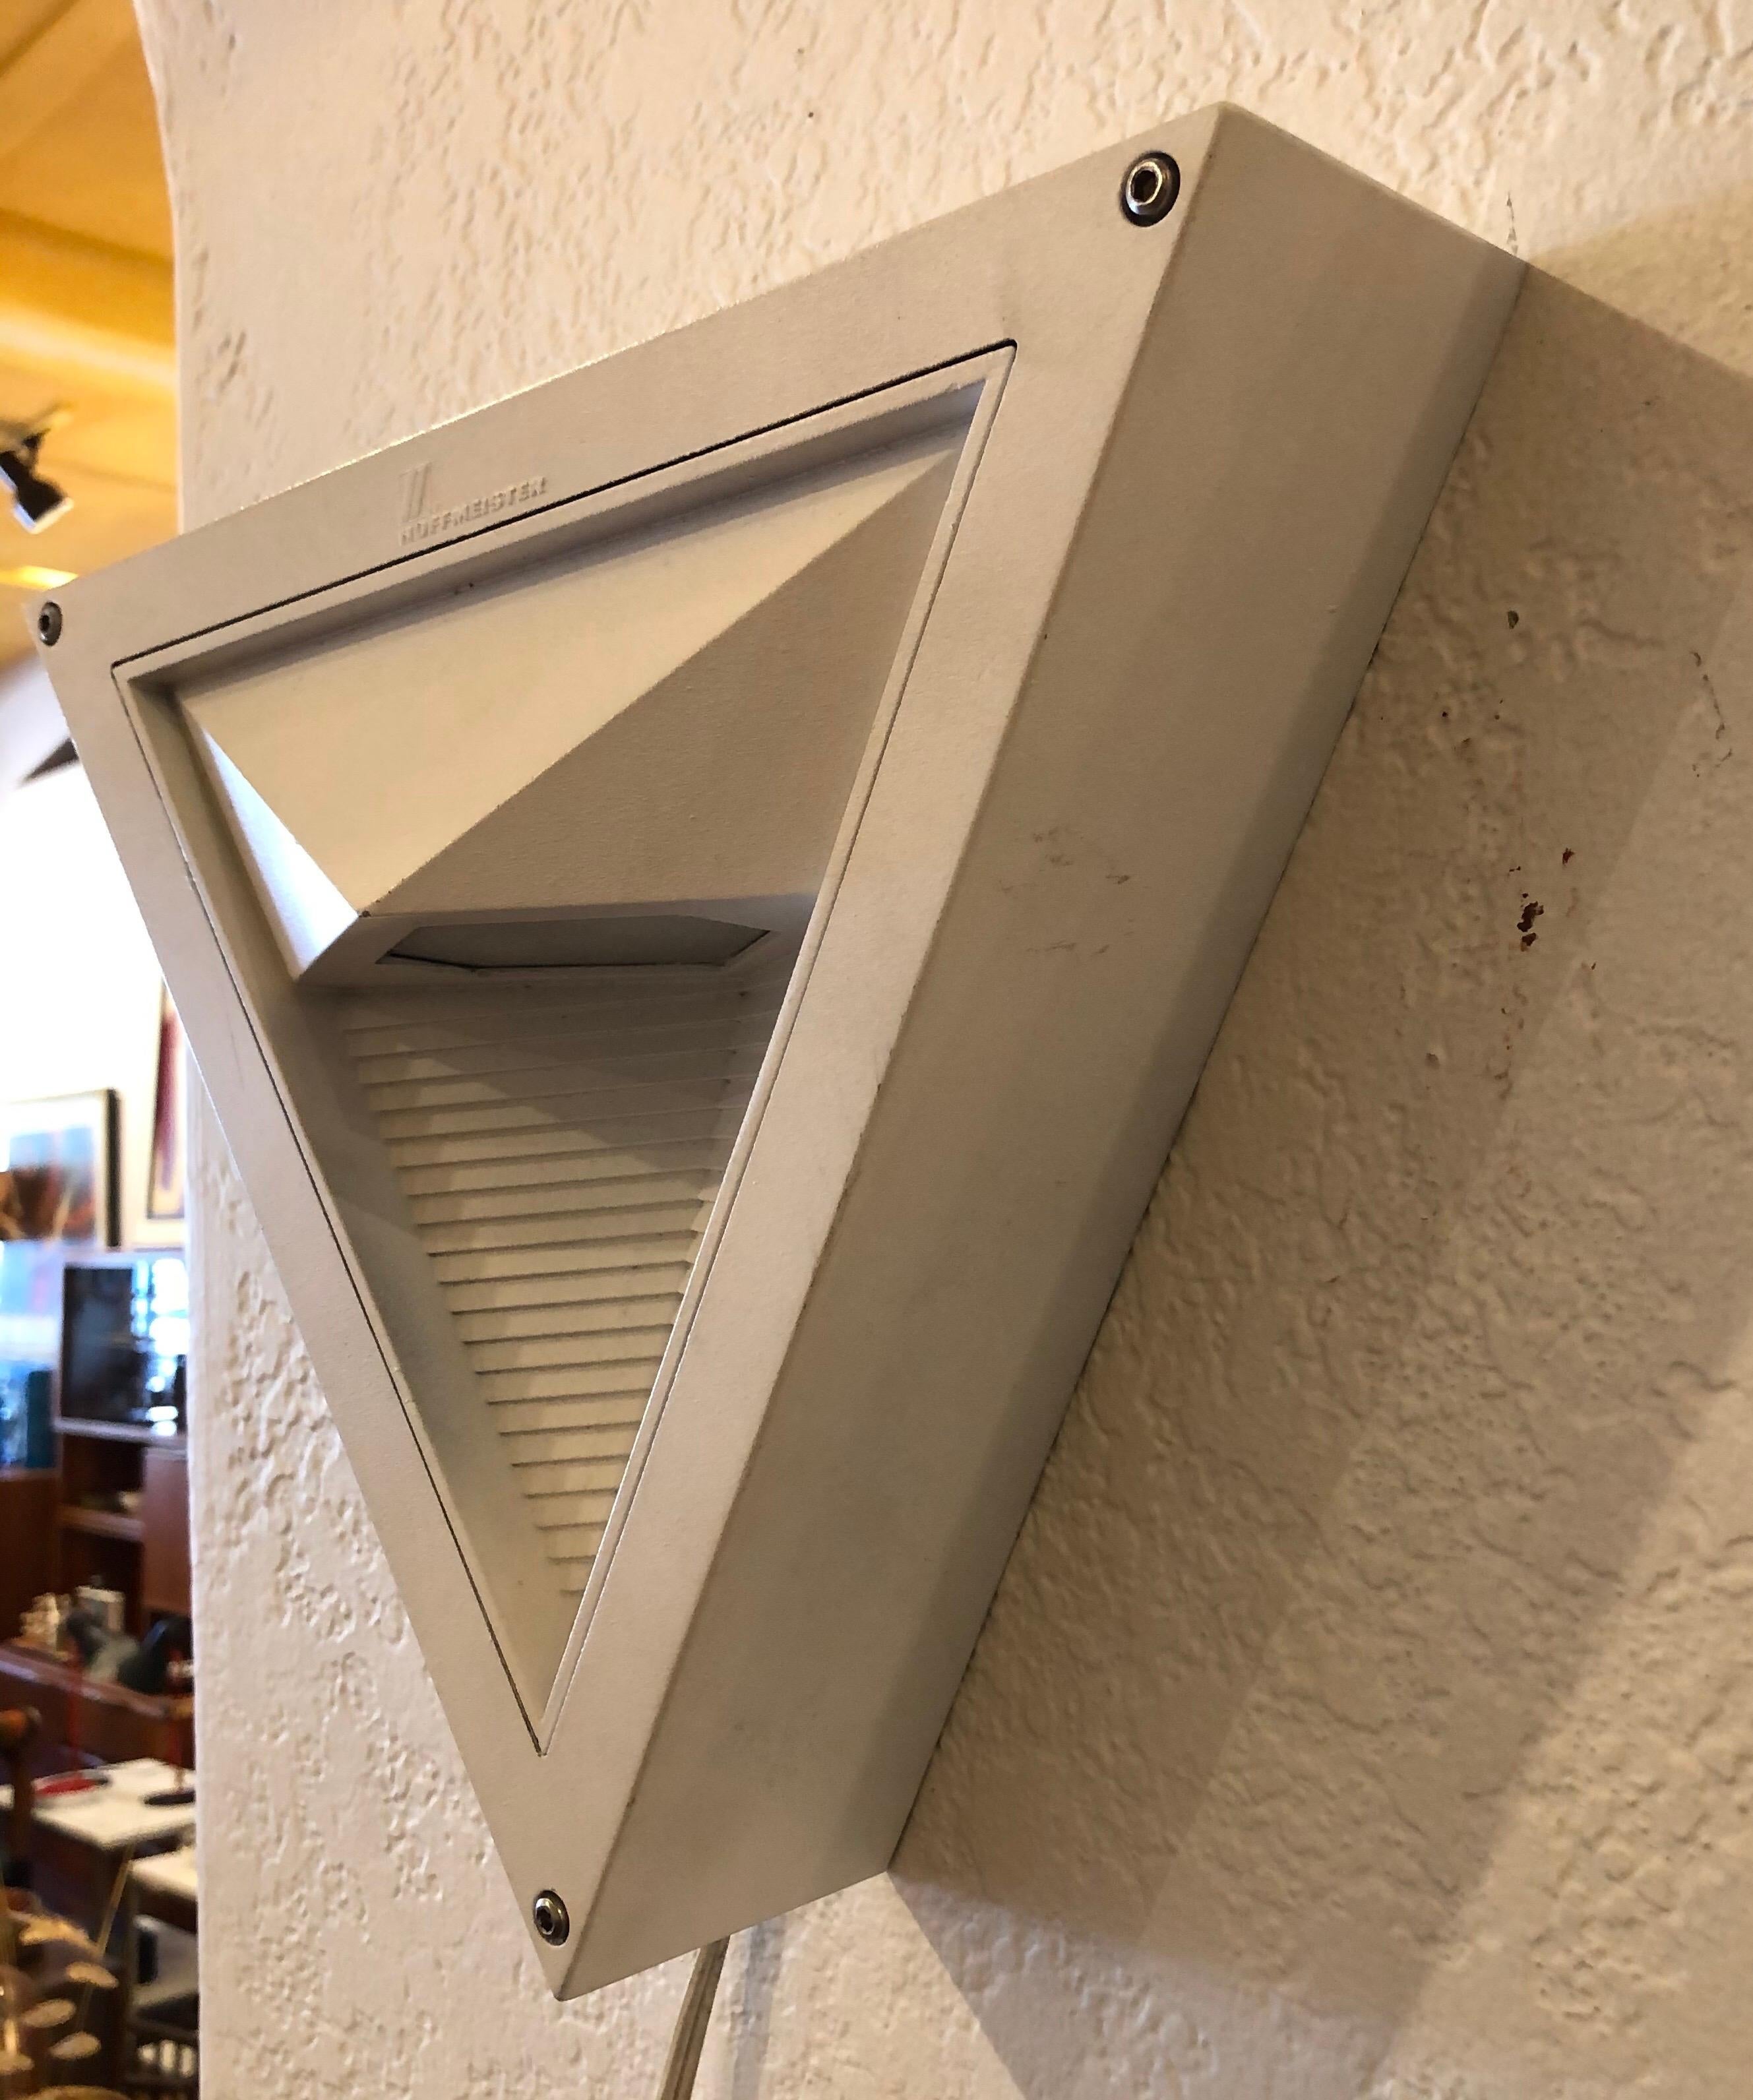 Postmodern triangular electric wall sconce by Hoffmeister of Germany, circa 1980's in cream / white color. in working condition switch off/on the cord.